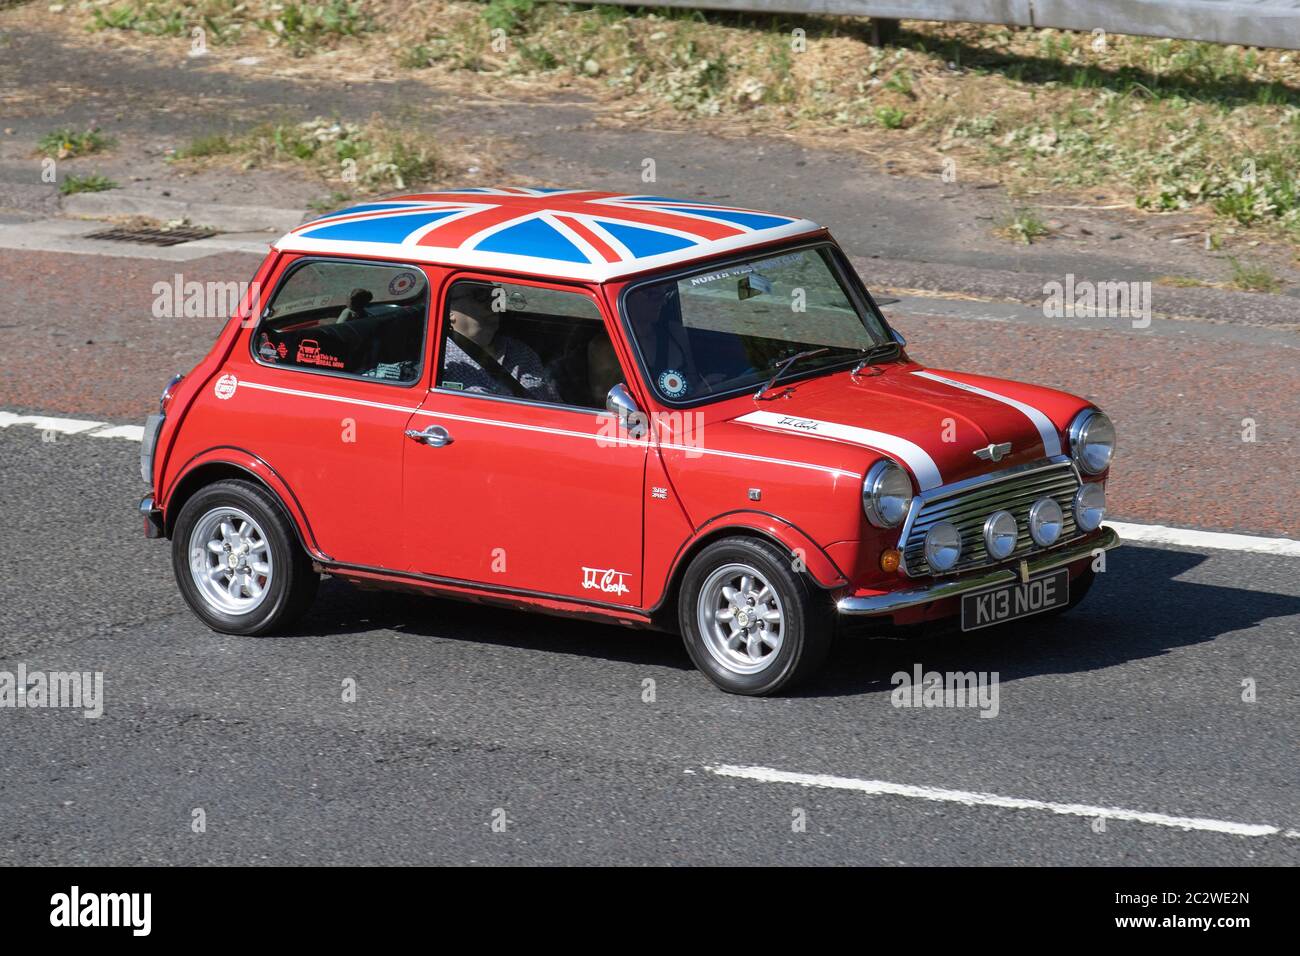 1993 90s nineties Rover Mini Cooper 1.3i; Vehicular traffic moving vehicles, cars driving vehicle on UK roads, 90s motors, motoring on the M6 motorway highway Stock Photo